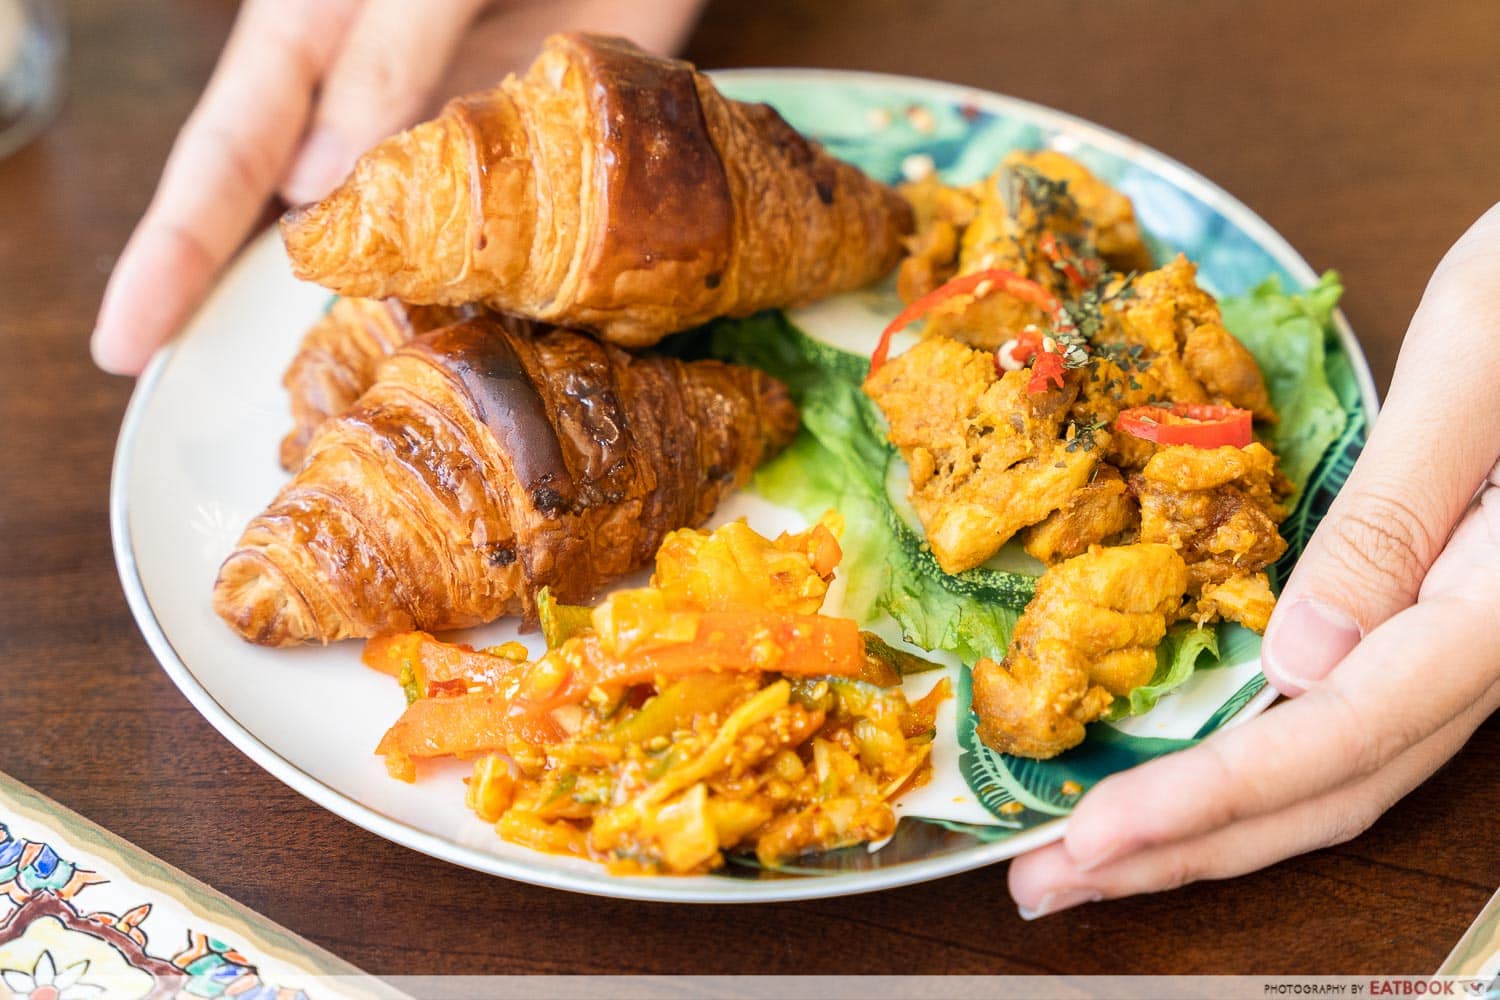 ambling turtle - curry chicken croissants